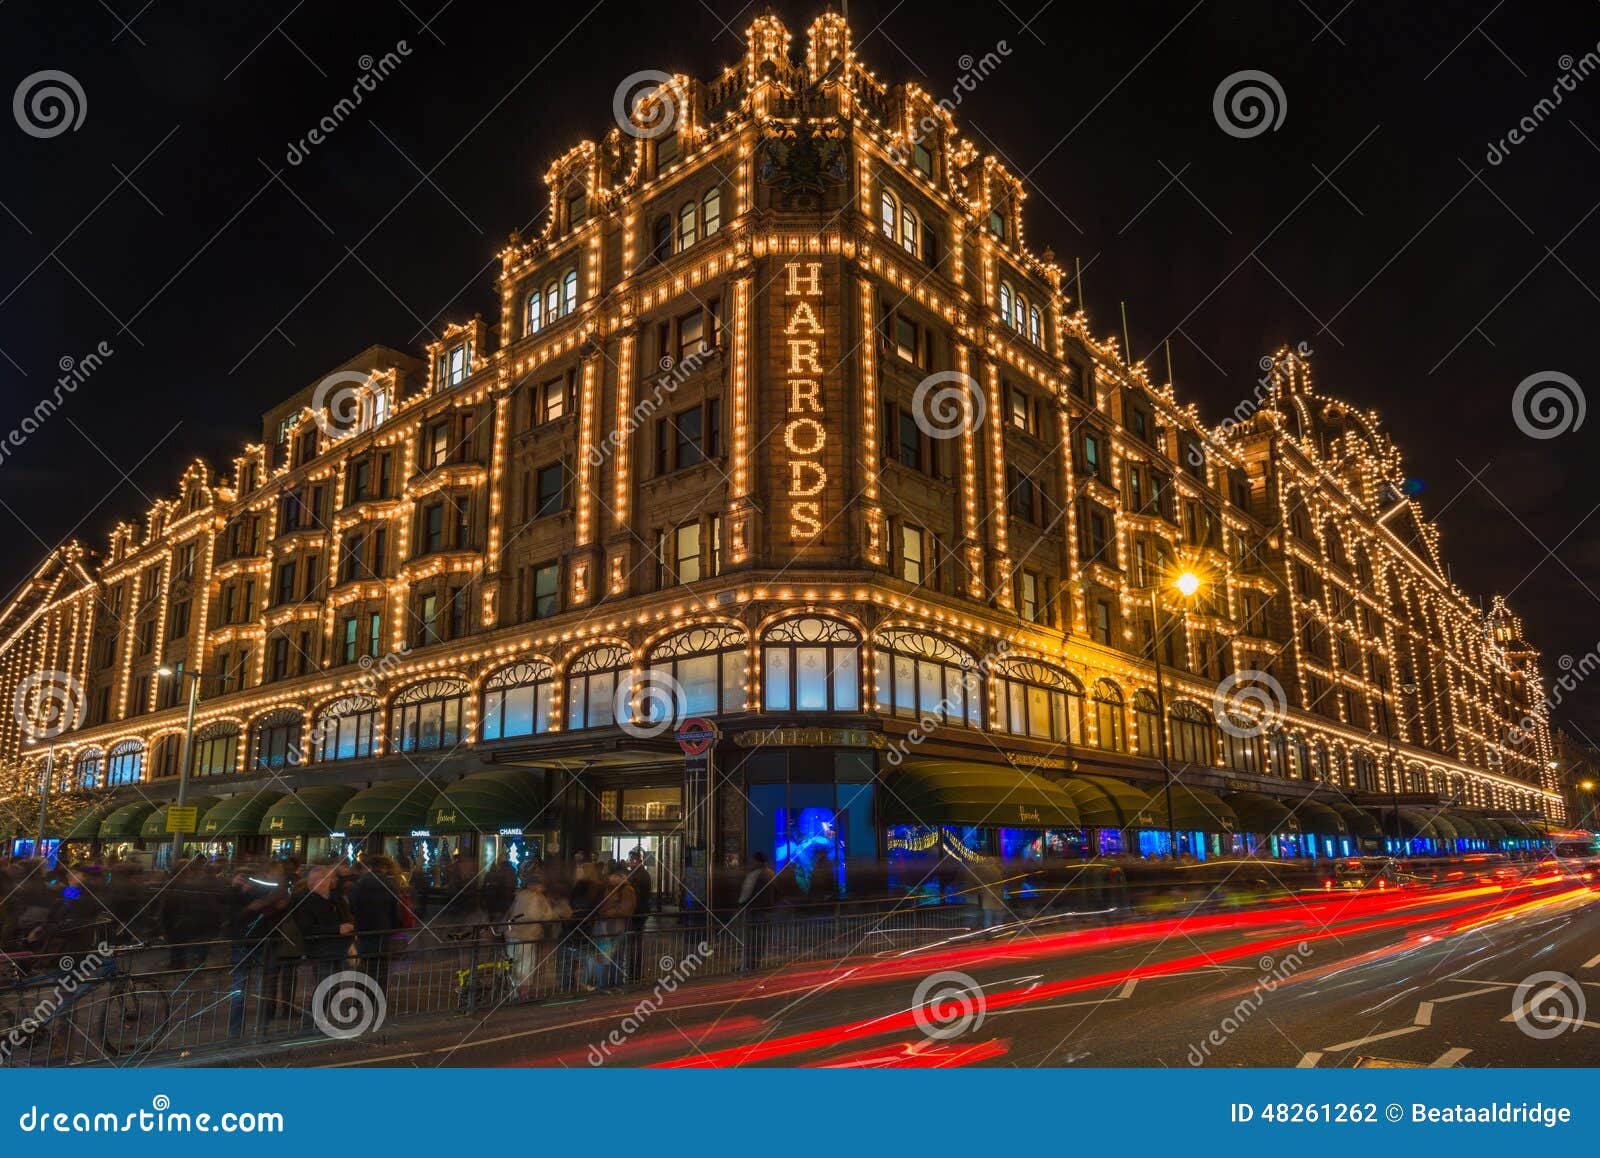 Harrods Store in London, UK with Christmas Decorations Editorial ...